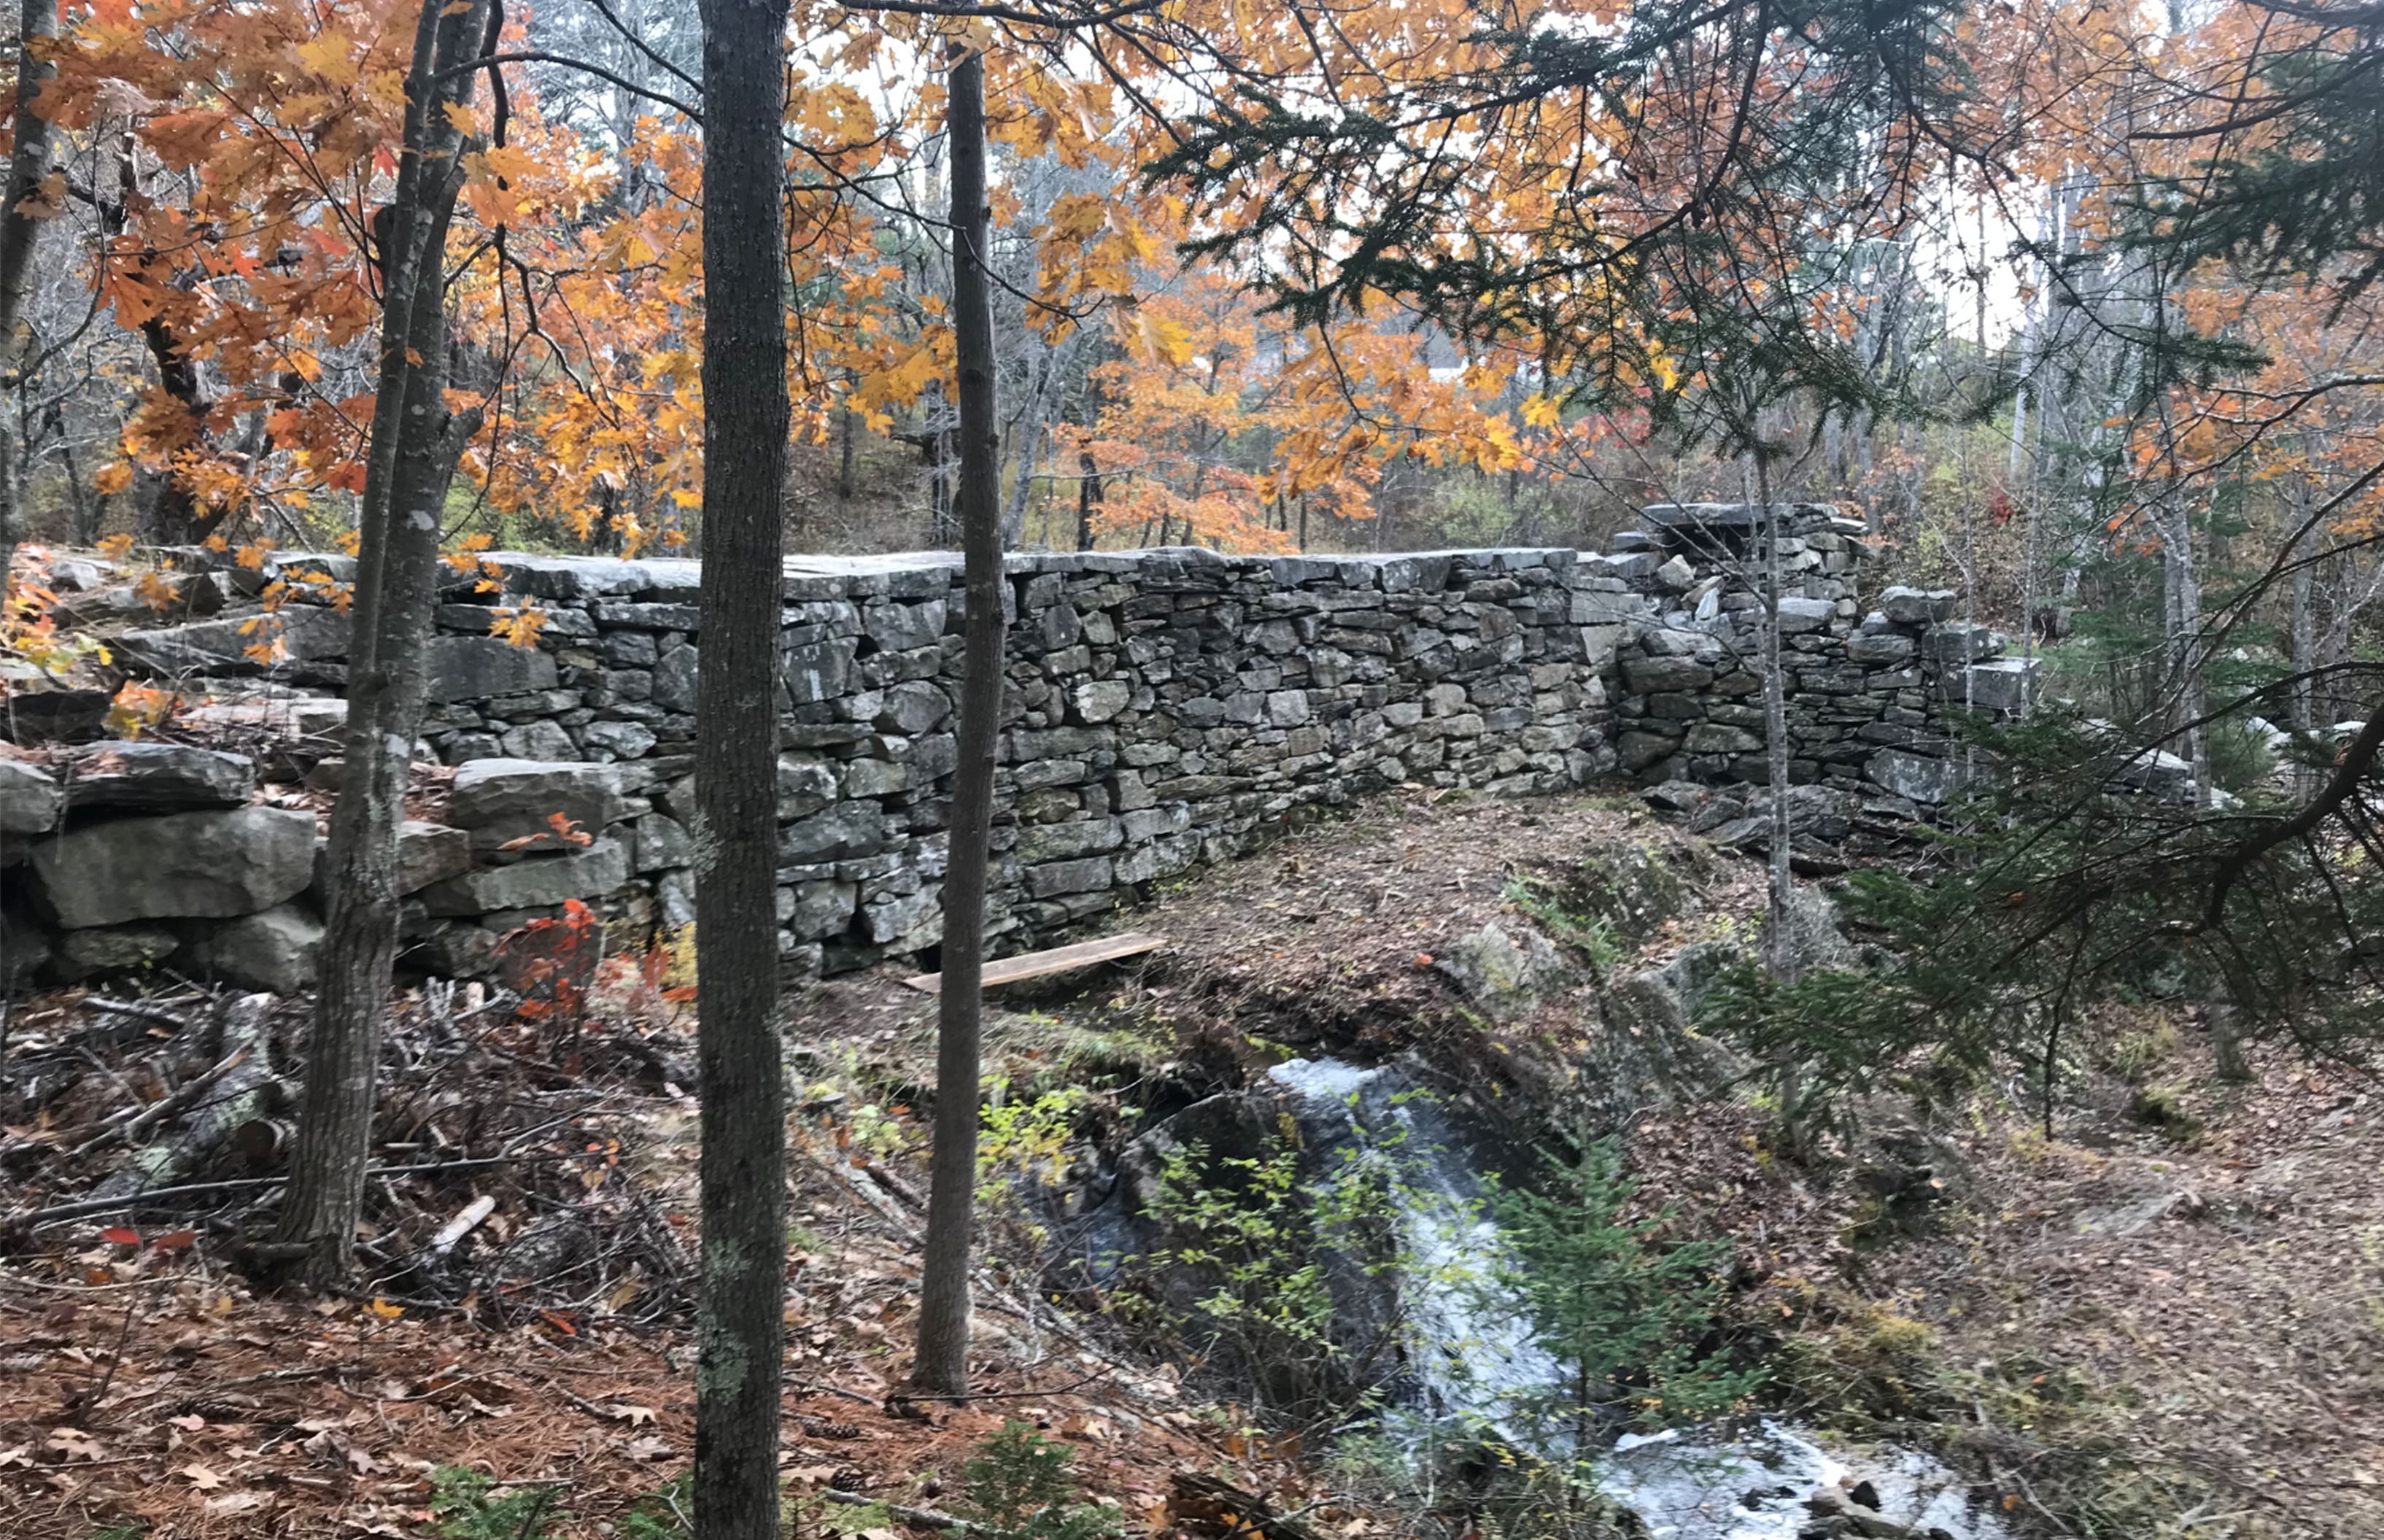 Surrounded by fall foliage is a stone dam out of which a small stream of water cascades down a rocky bank.